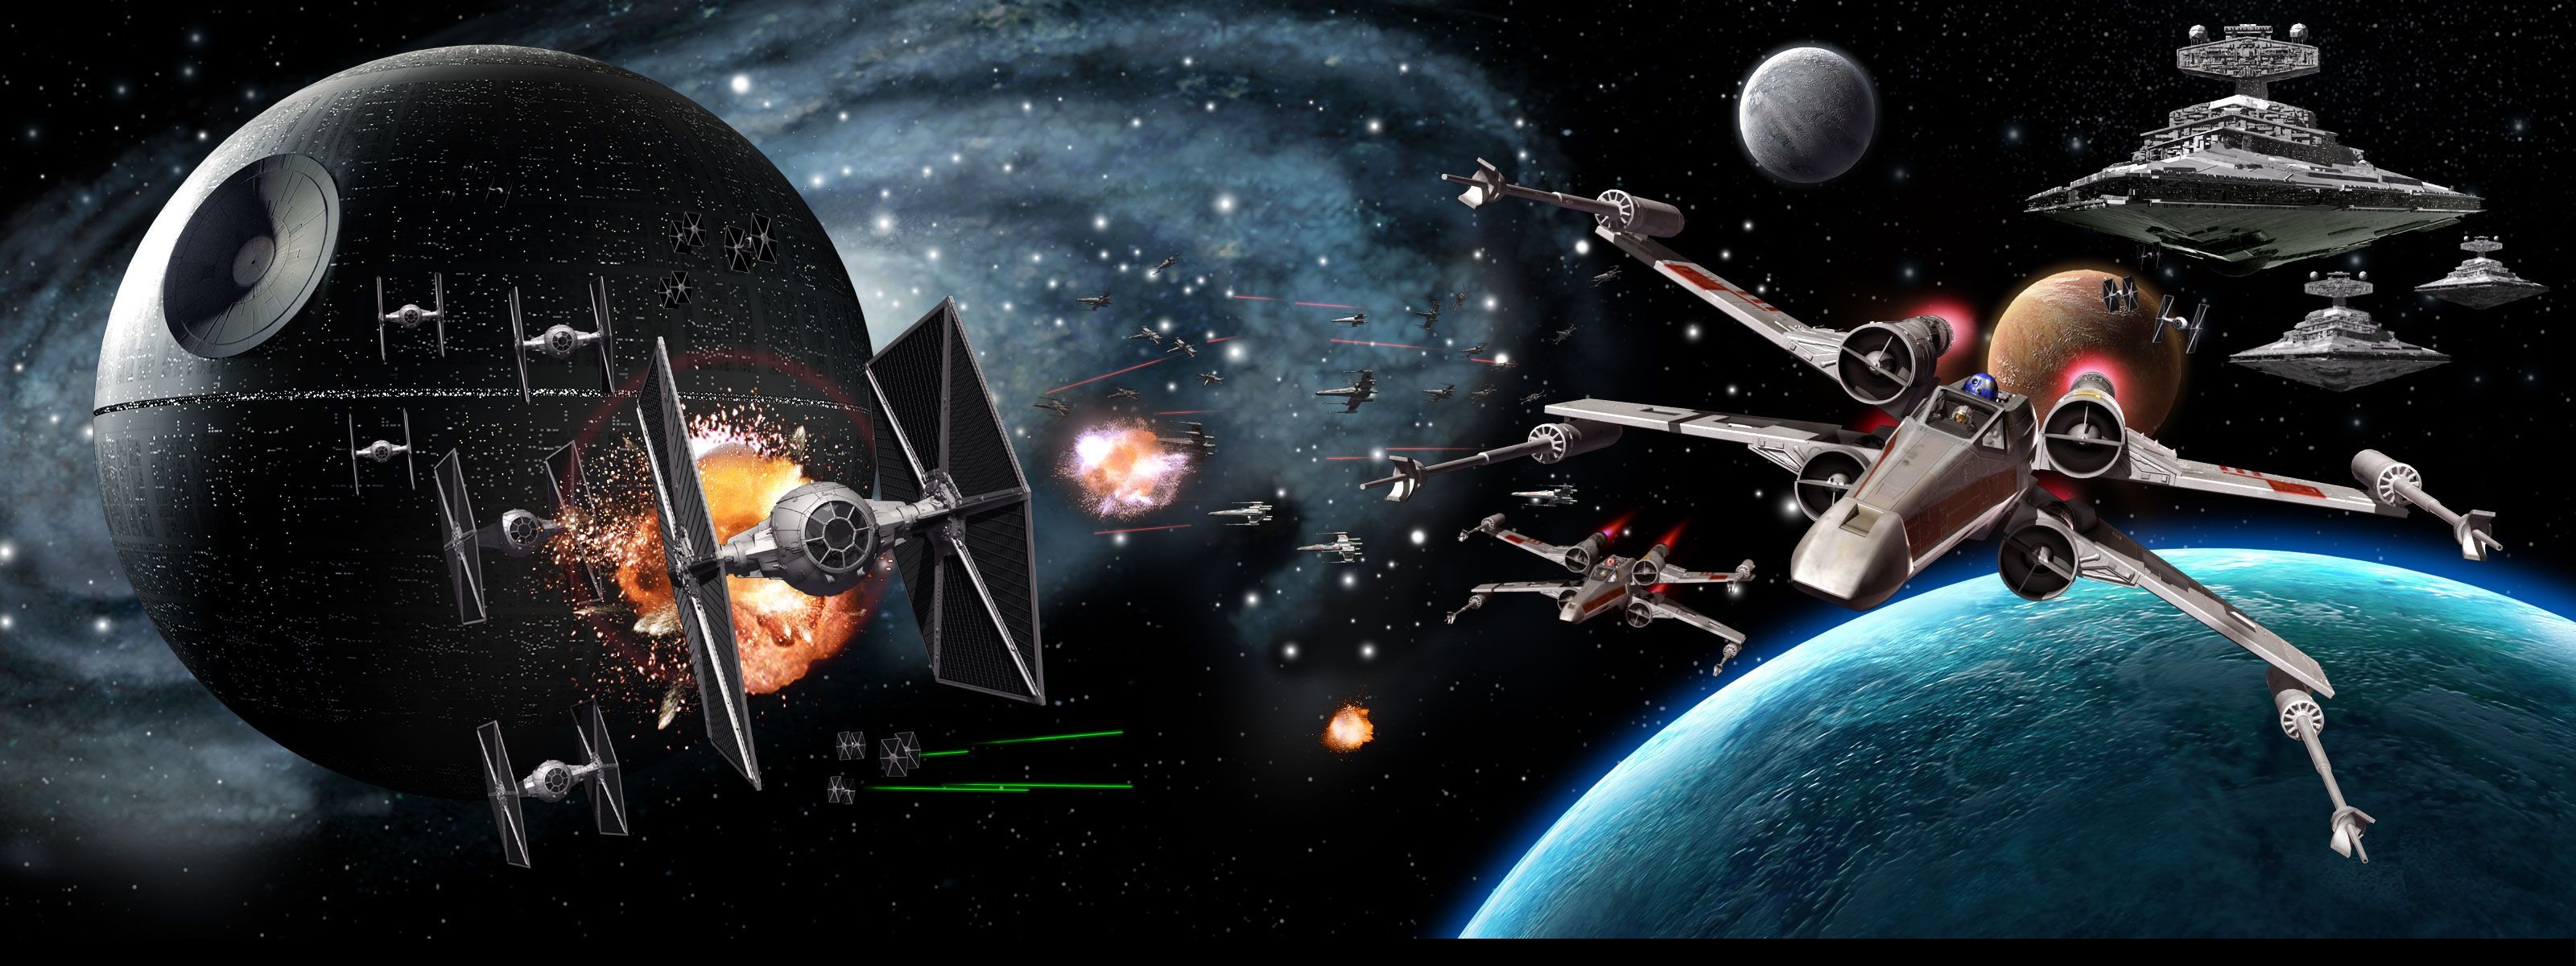 3200x1200 star wars Multi Monitor sci fi science battle death star outer space  vehicles spaceships spacecrafts wallpaper